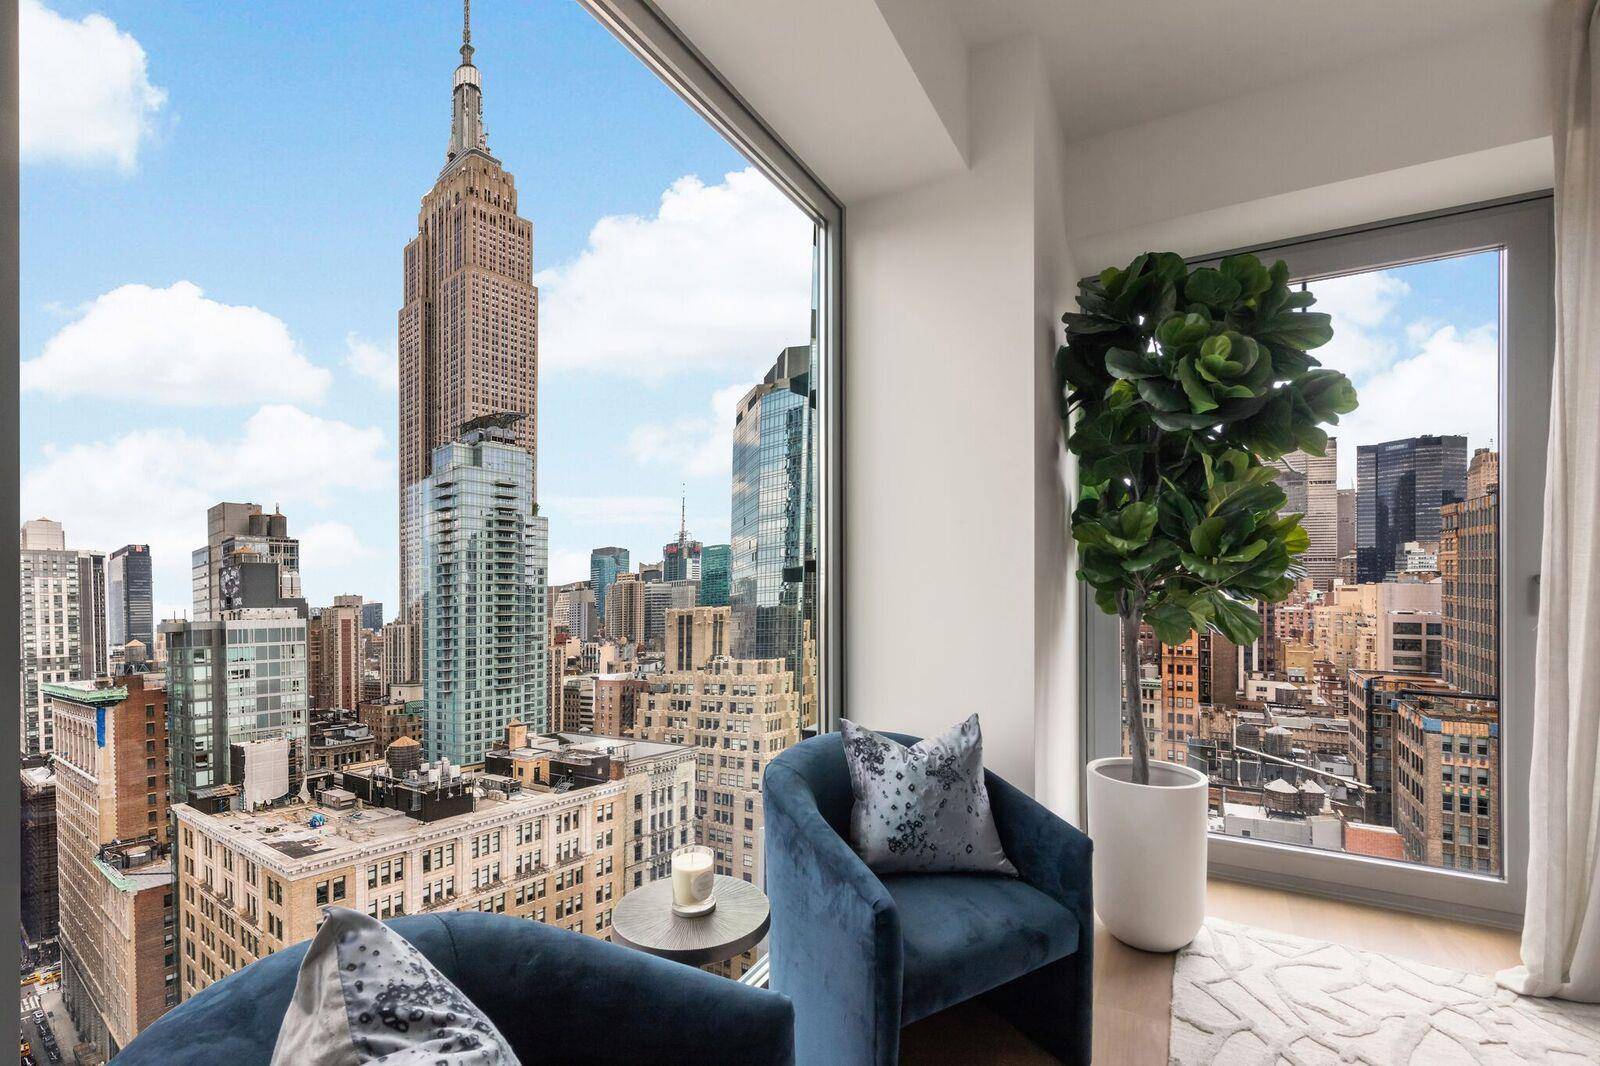 NOW OFFERING 2 YEARS FREE OF COMMON CHARGES Welcome to the Neo Gothic splendor that is 30 East 31 in the historic and trendy NoMad North of Madison Square Park, ...